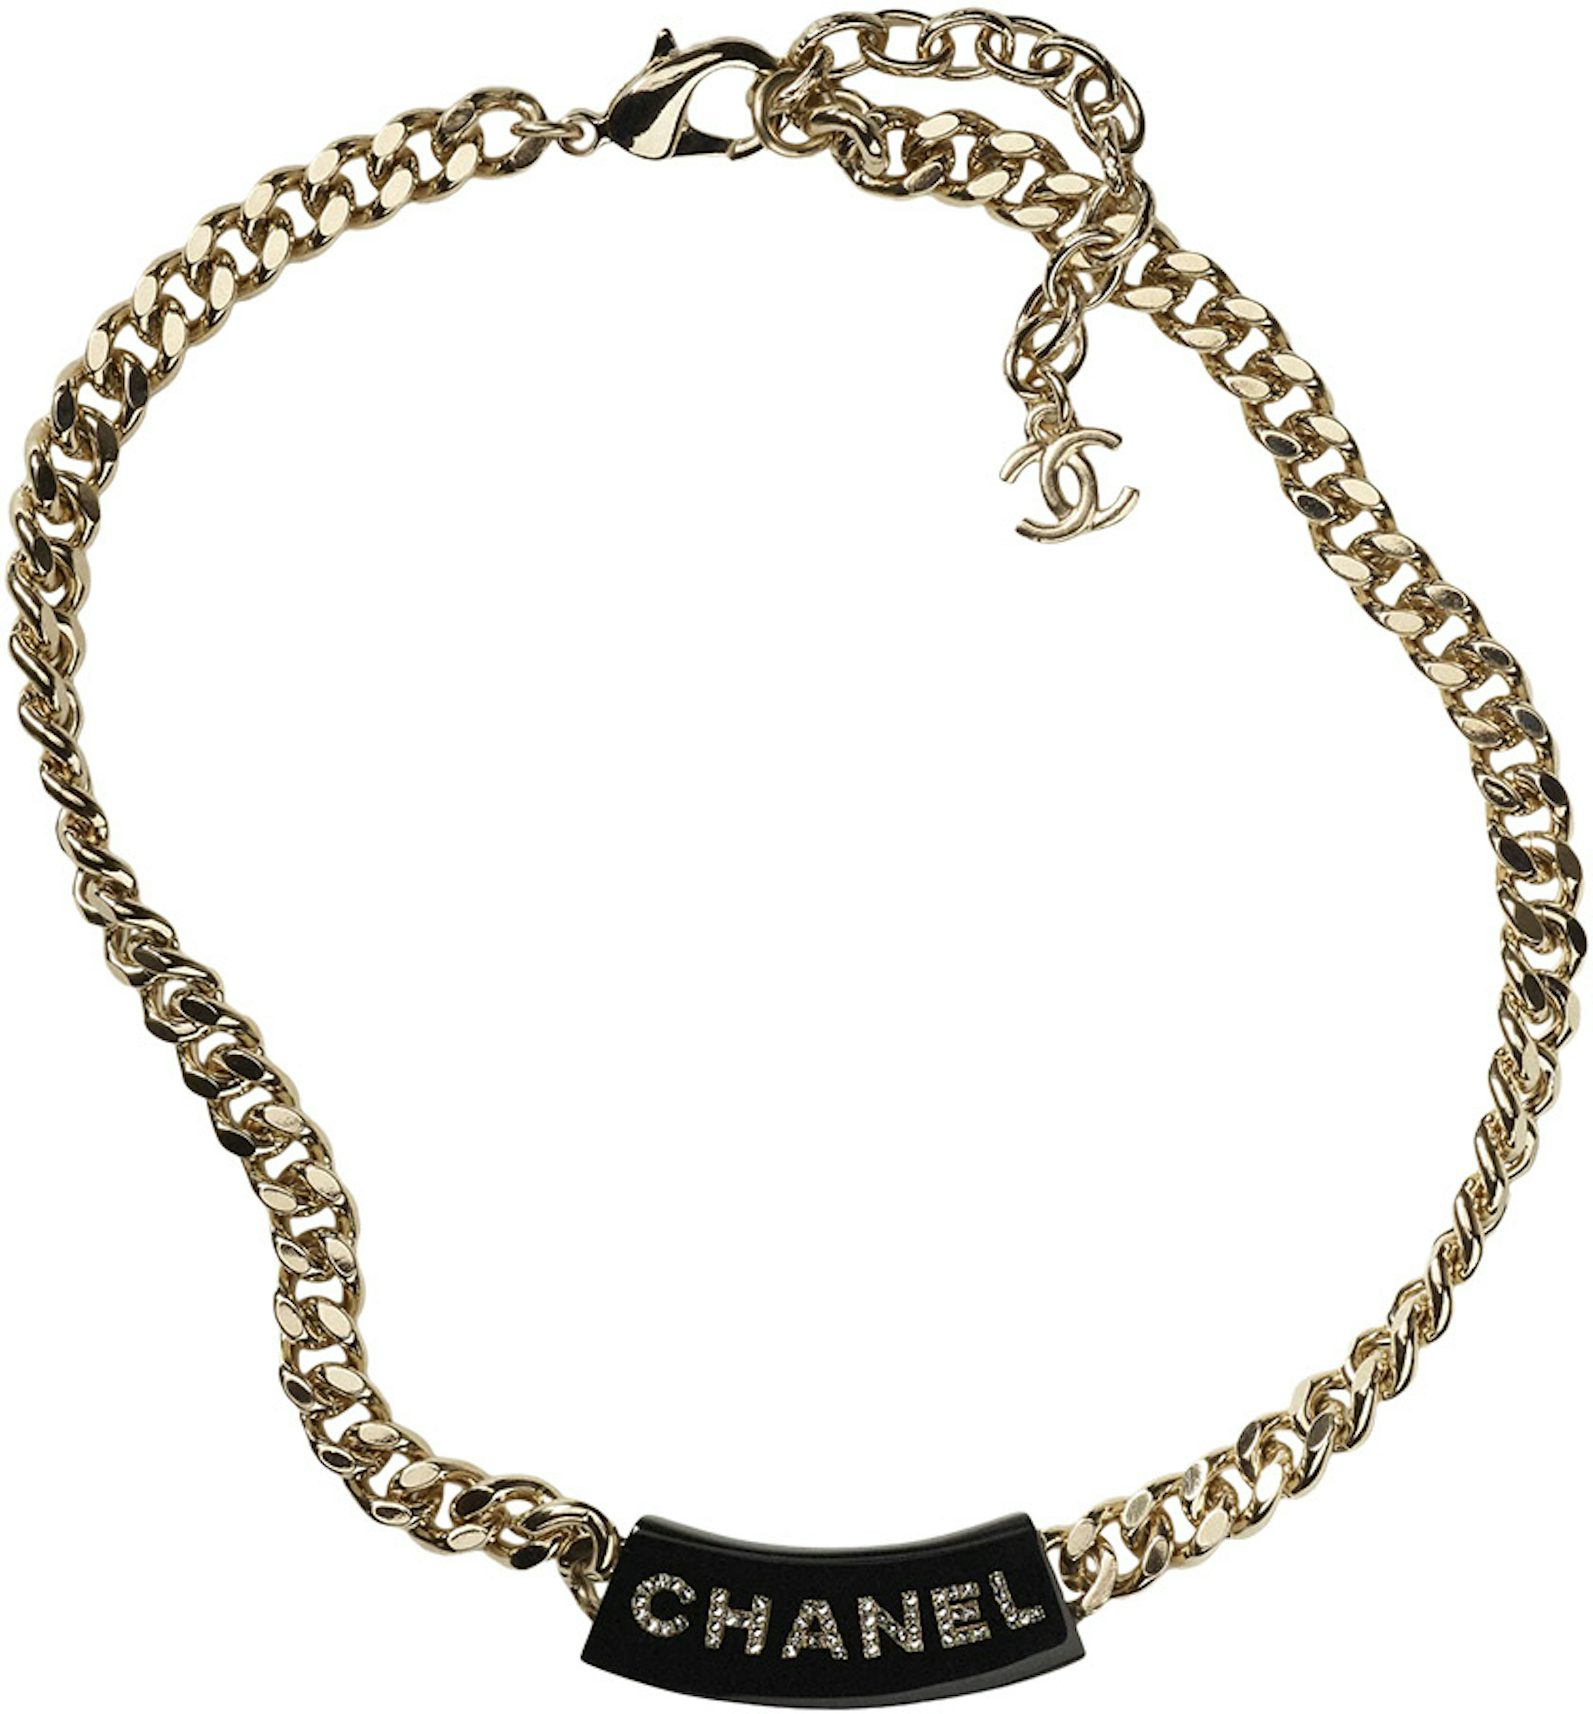 Chanel Metal Choker Necklace Gold/Crystal in Gold Metal - US